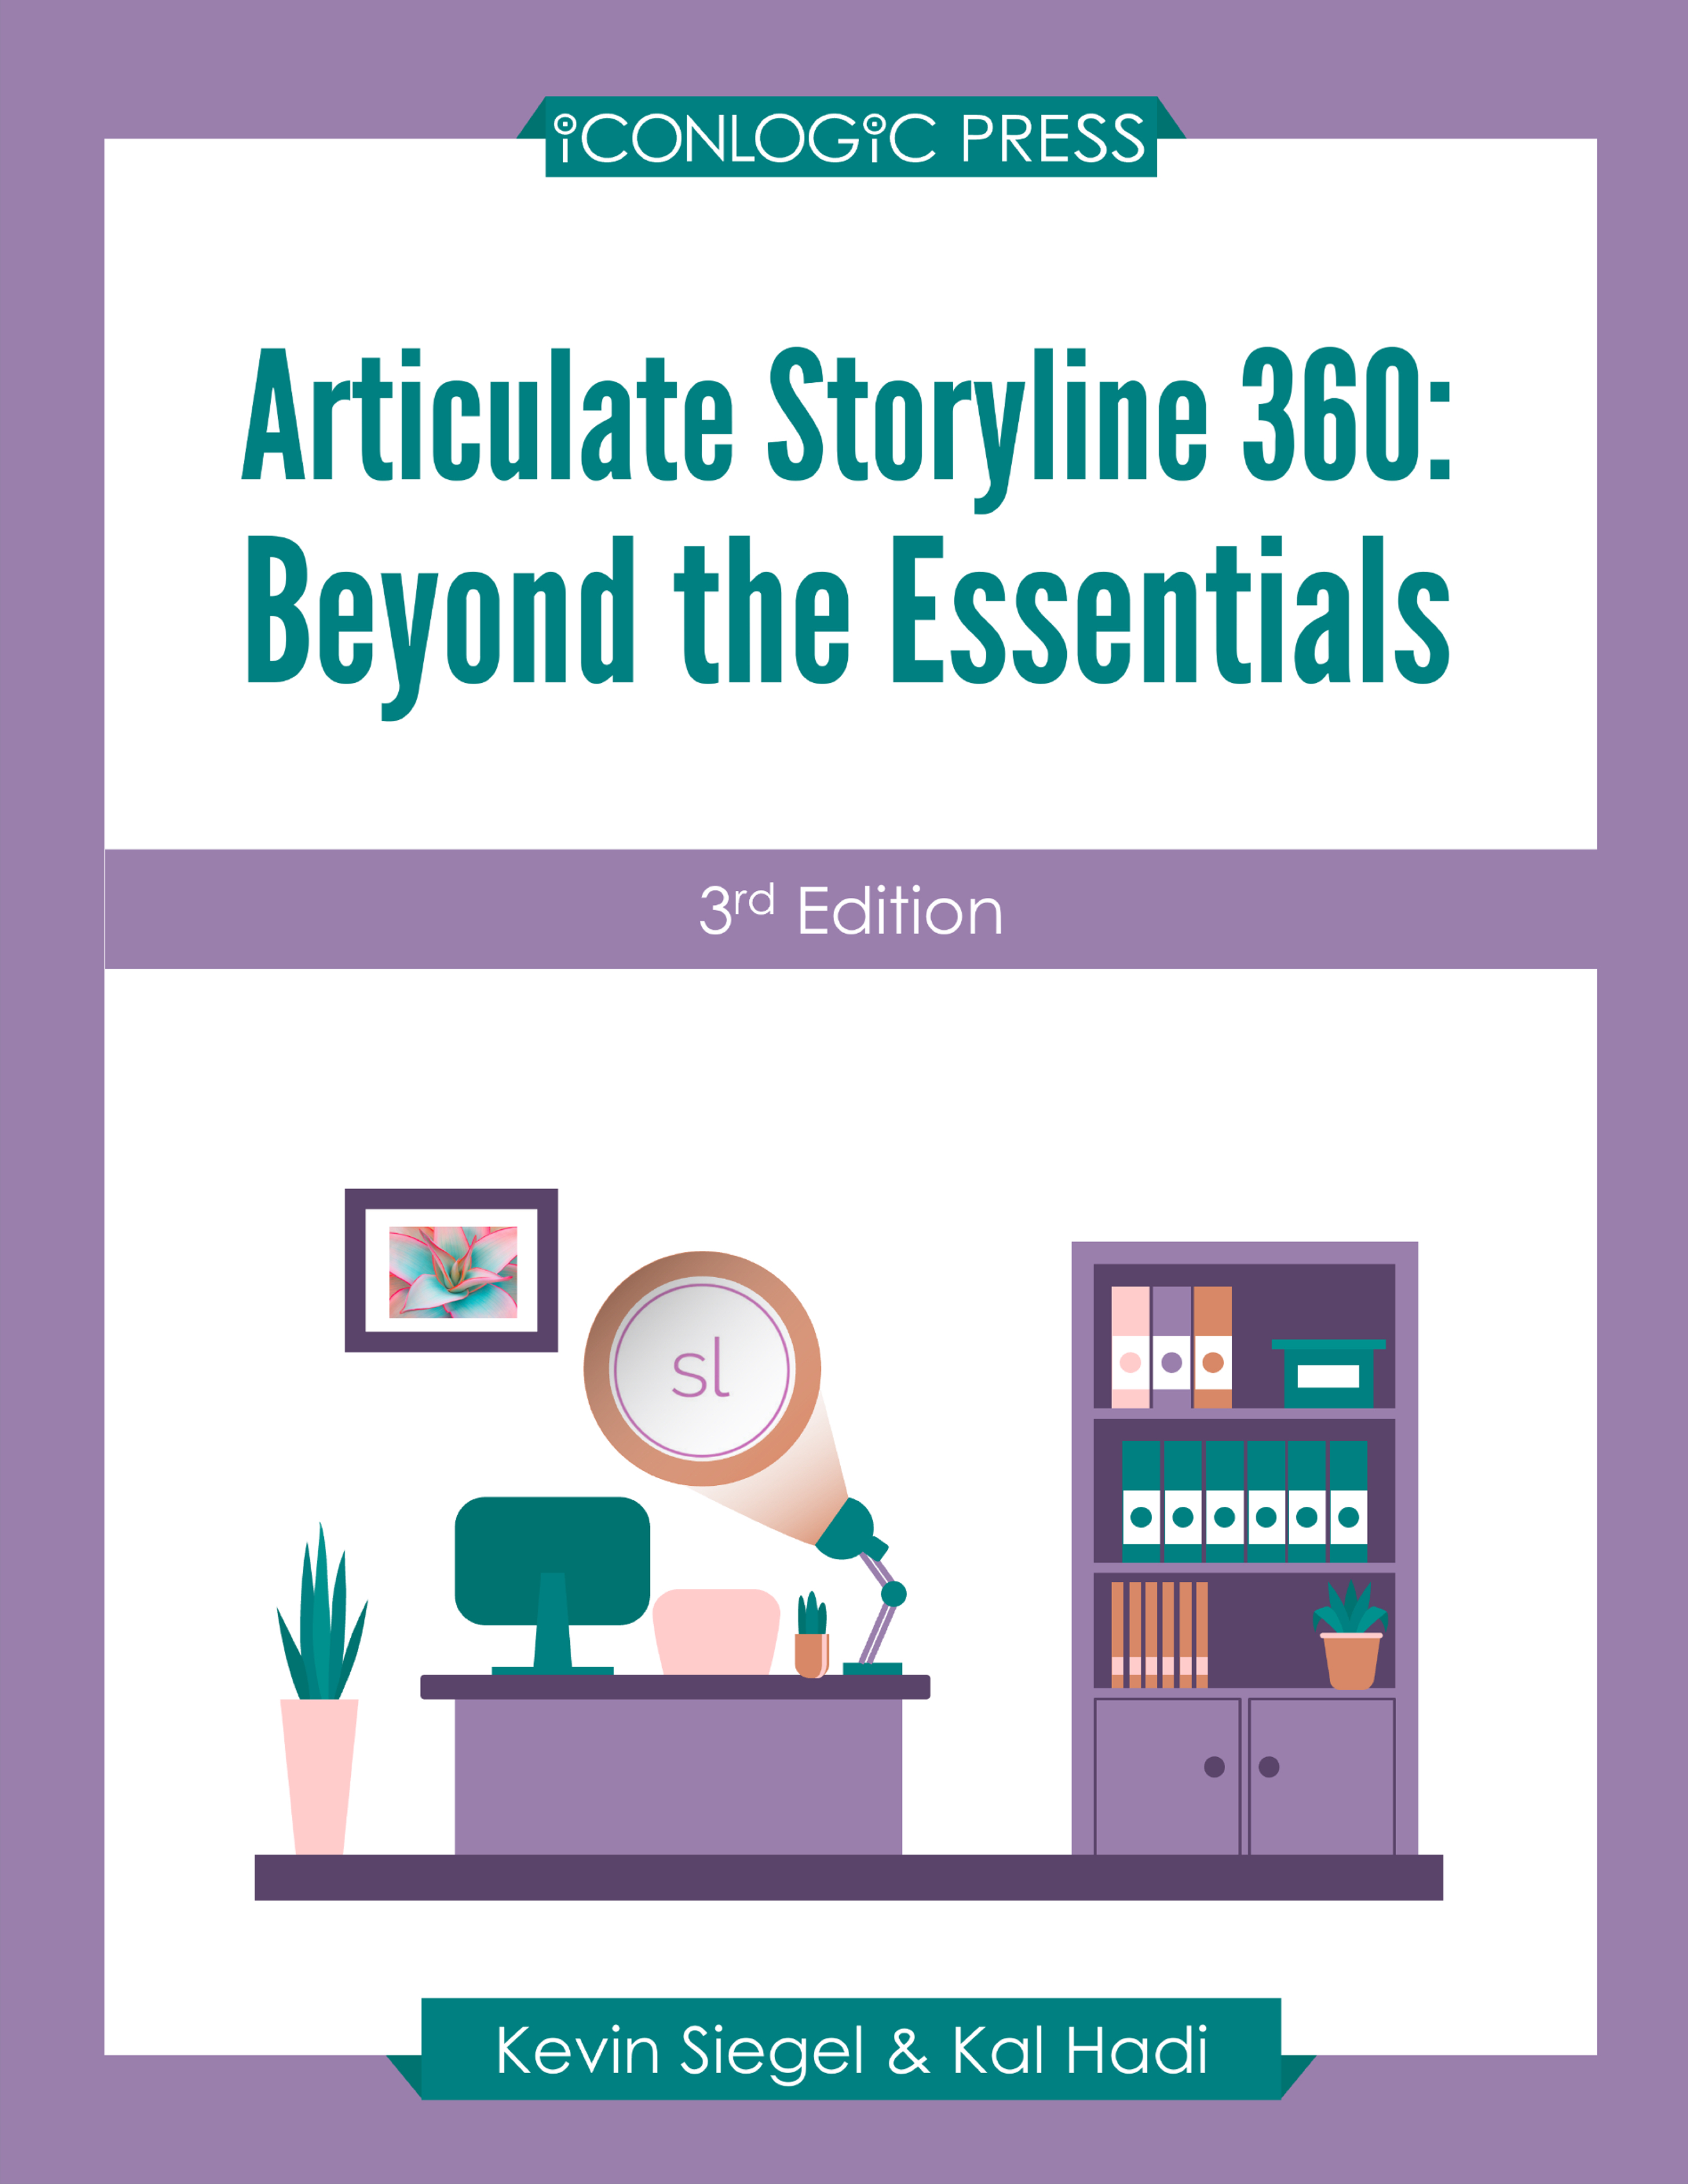 Articulate Storyline 360: Beyond the Essentials (3rd Edition) book cover